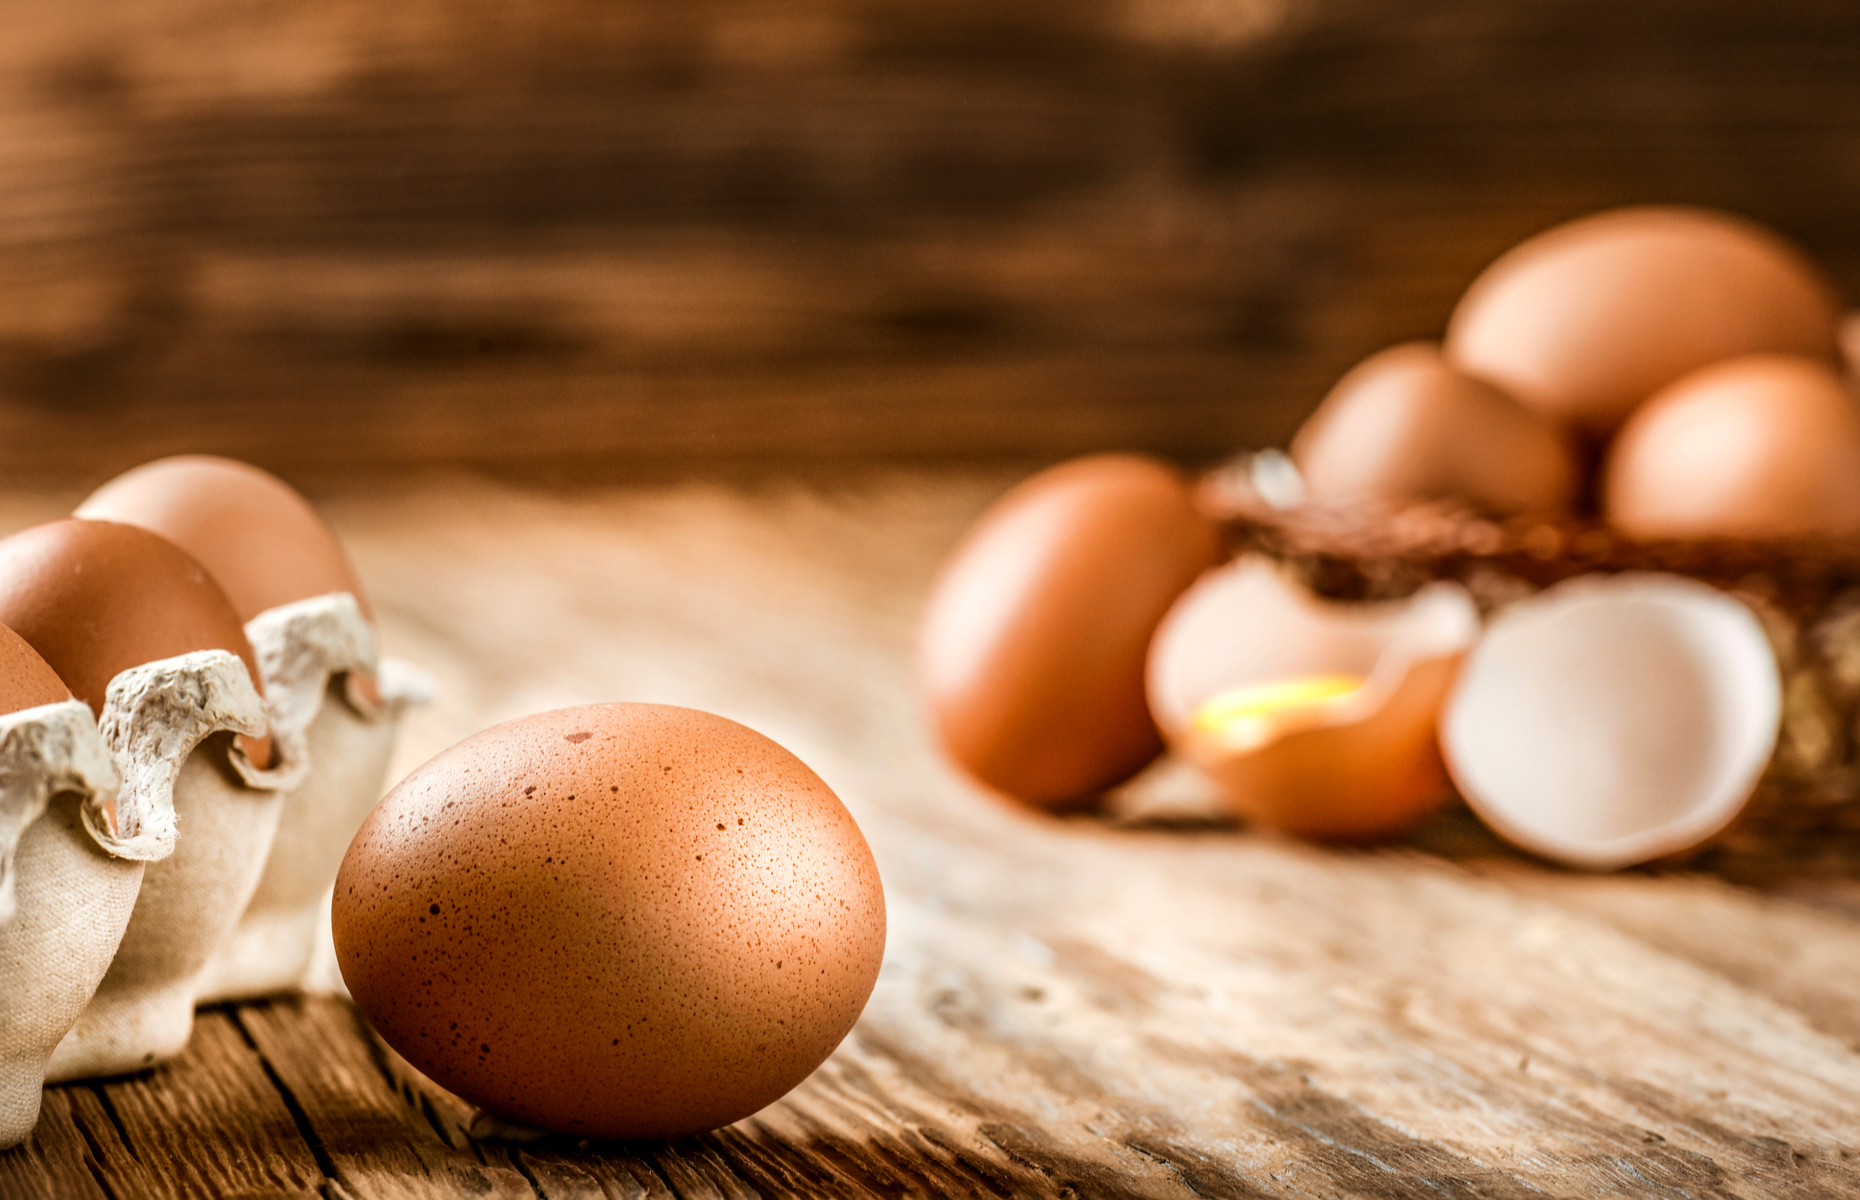 <p>Eggs are very versatile, add flavour and texture to recipes, and are easily incorporated into countless dishes and desserts. One large egg contains an average of <a href="https://www.eggs.ca/nutrition/view/1/egg-nutrition" rel="noreferrer noopener">6.5 g of protein</a> and one dozen can cost as little as $1.55.</p>